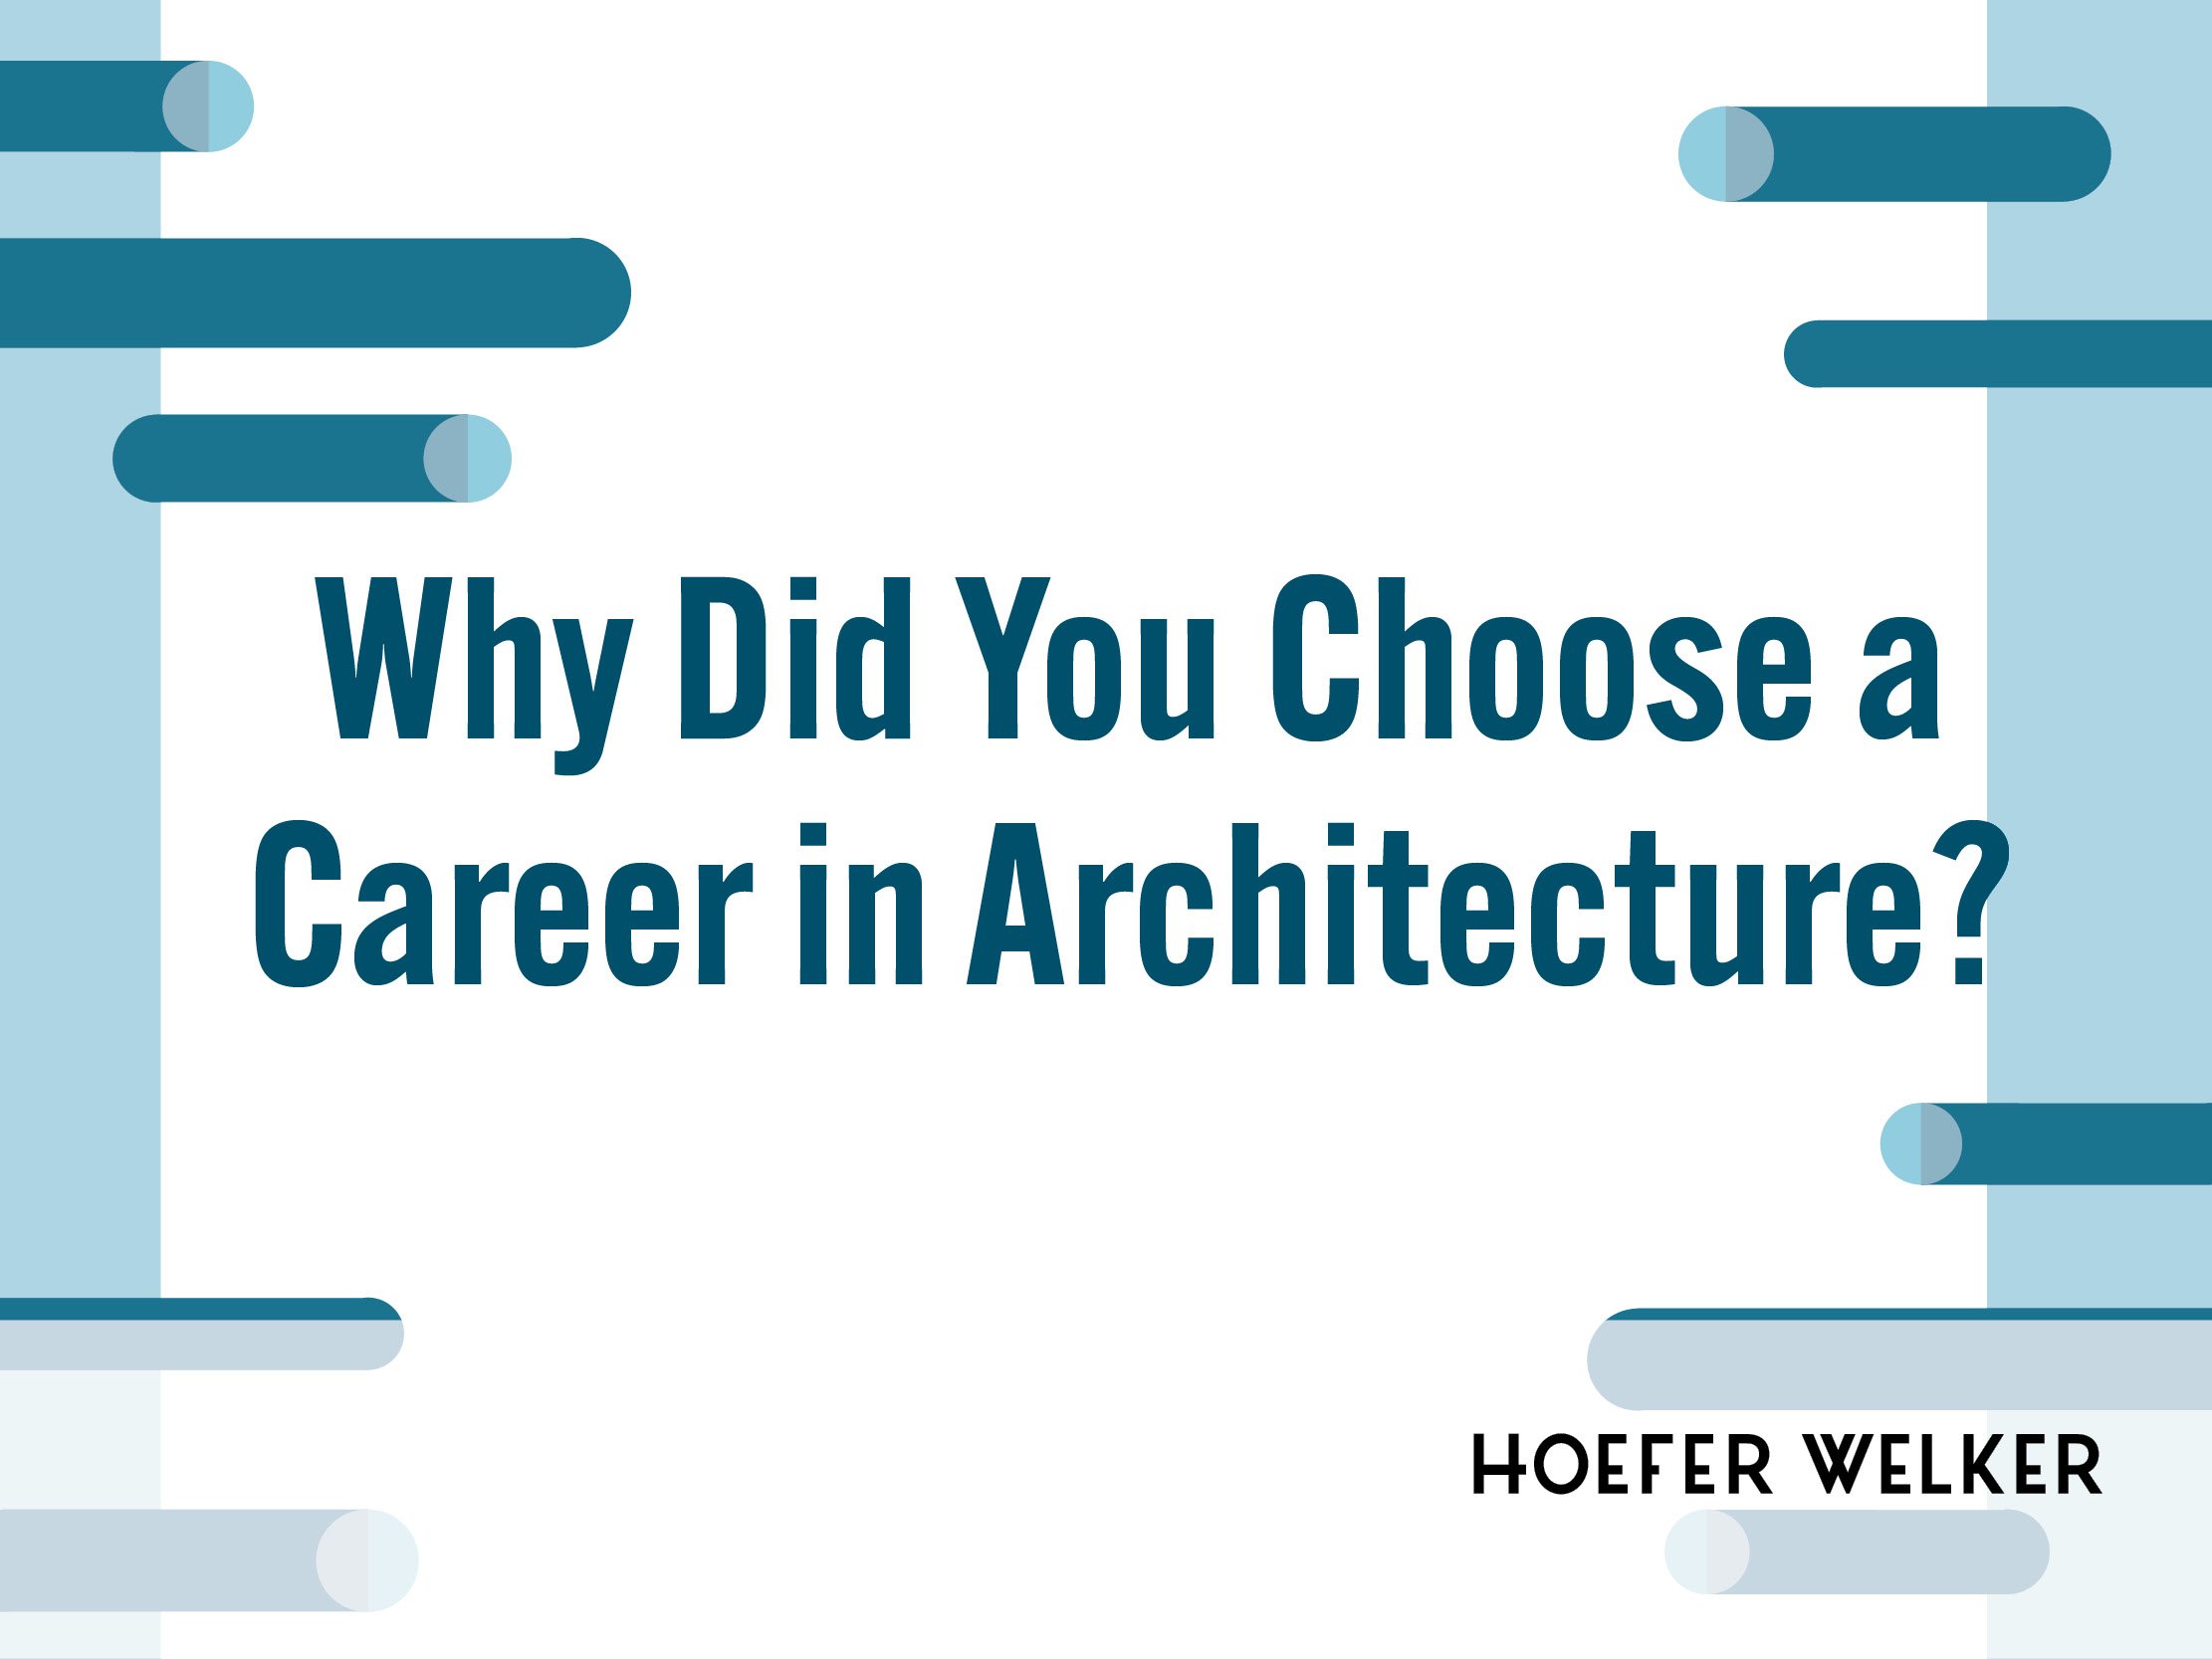 Why Did You Choose a Career in Architecture?